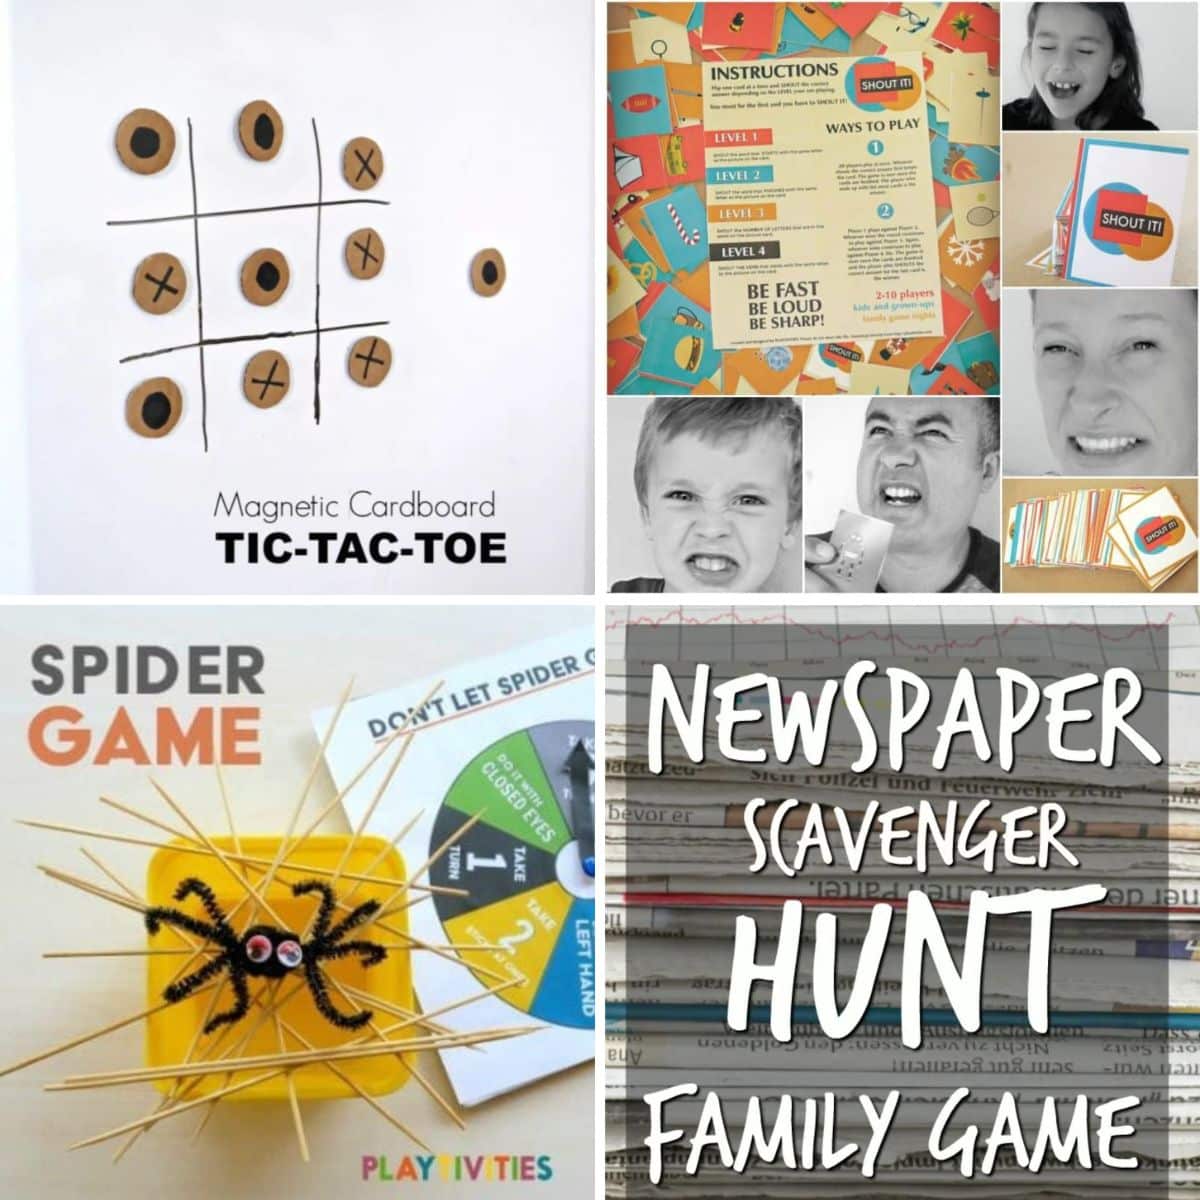 4 images of hilarious family games.